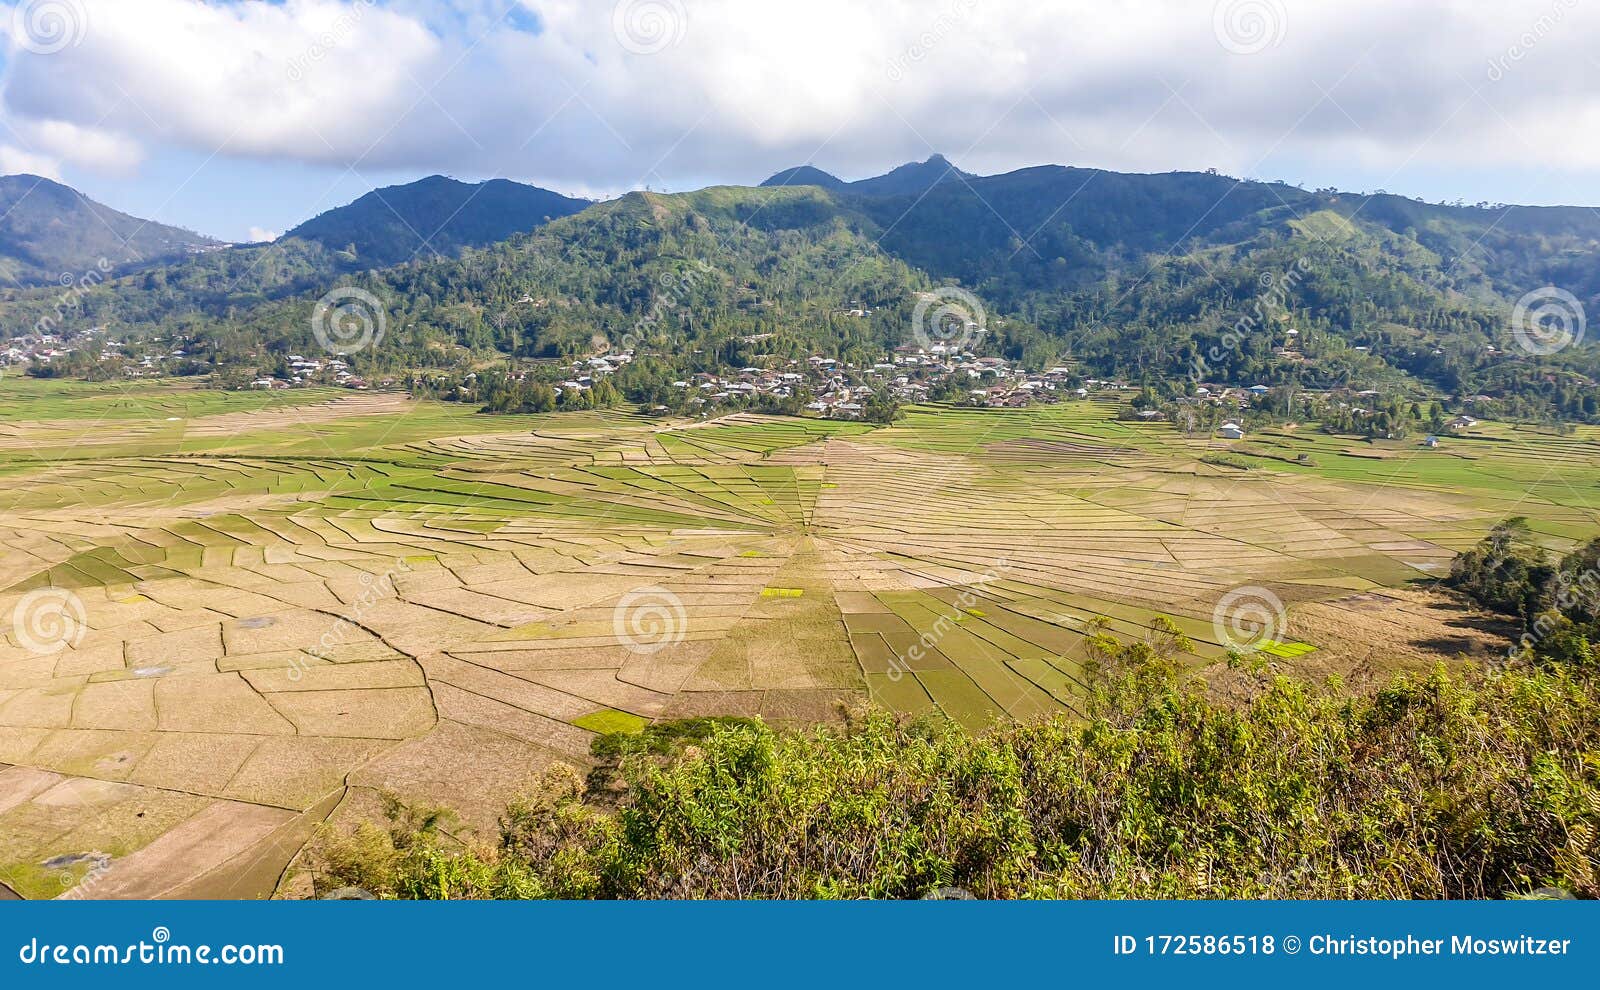 ruteng - panoramic view on iconic spider web rice fields